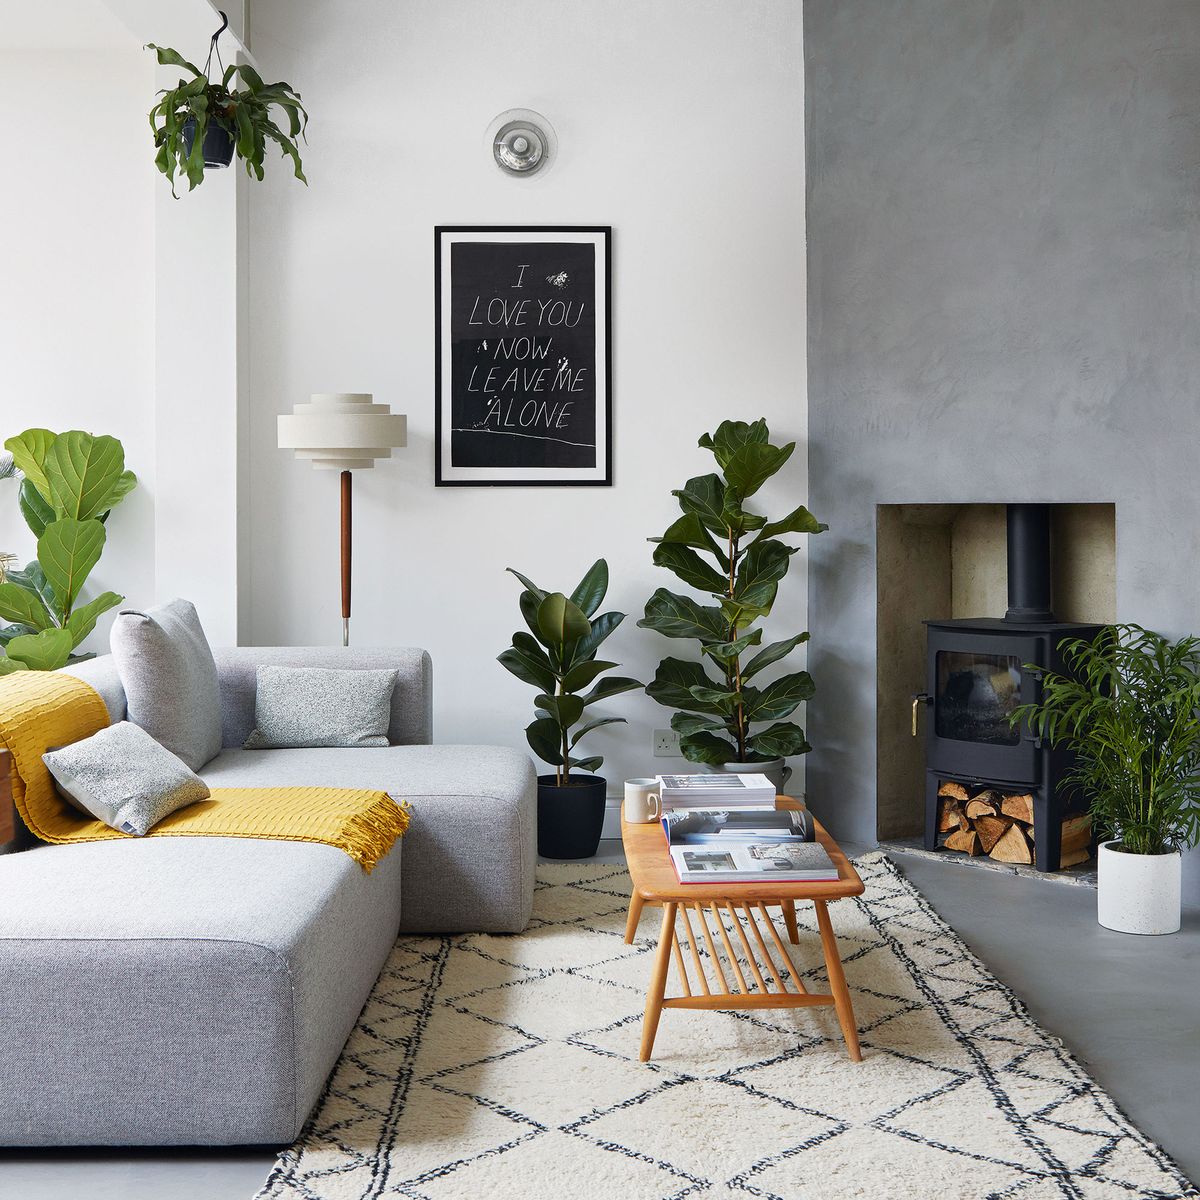 7 Grey living room mistakes to avoid, according to experts